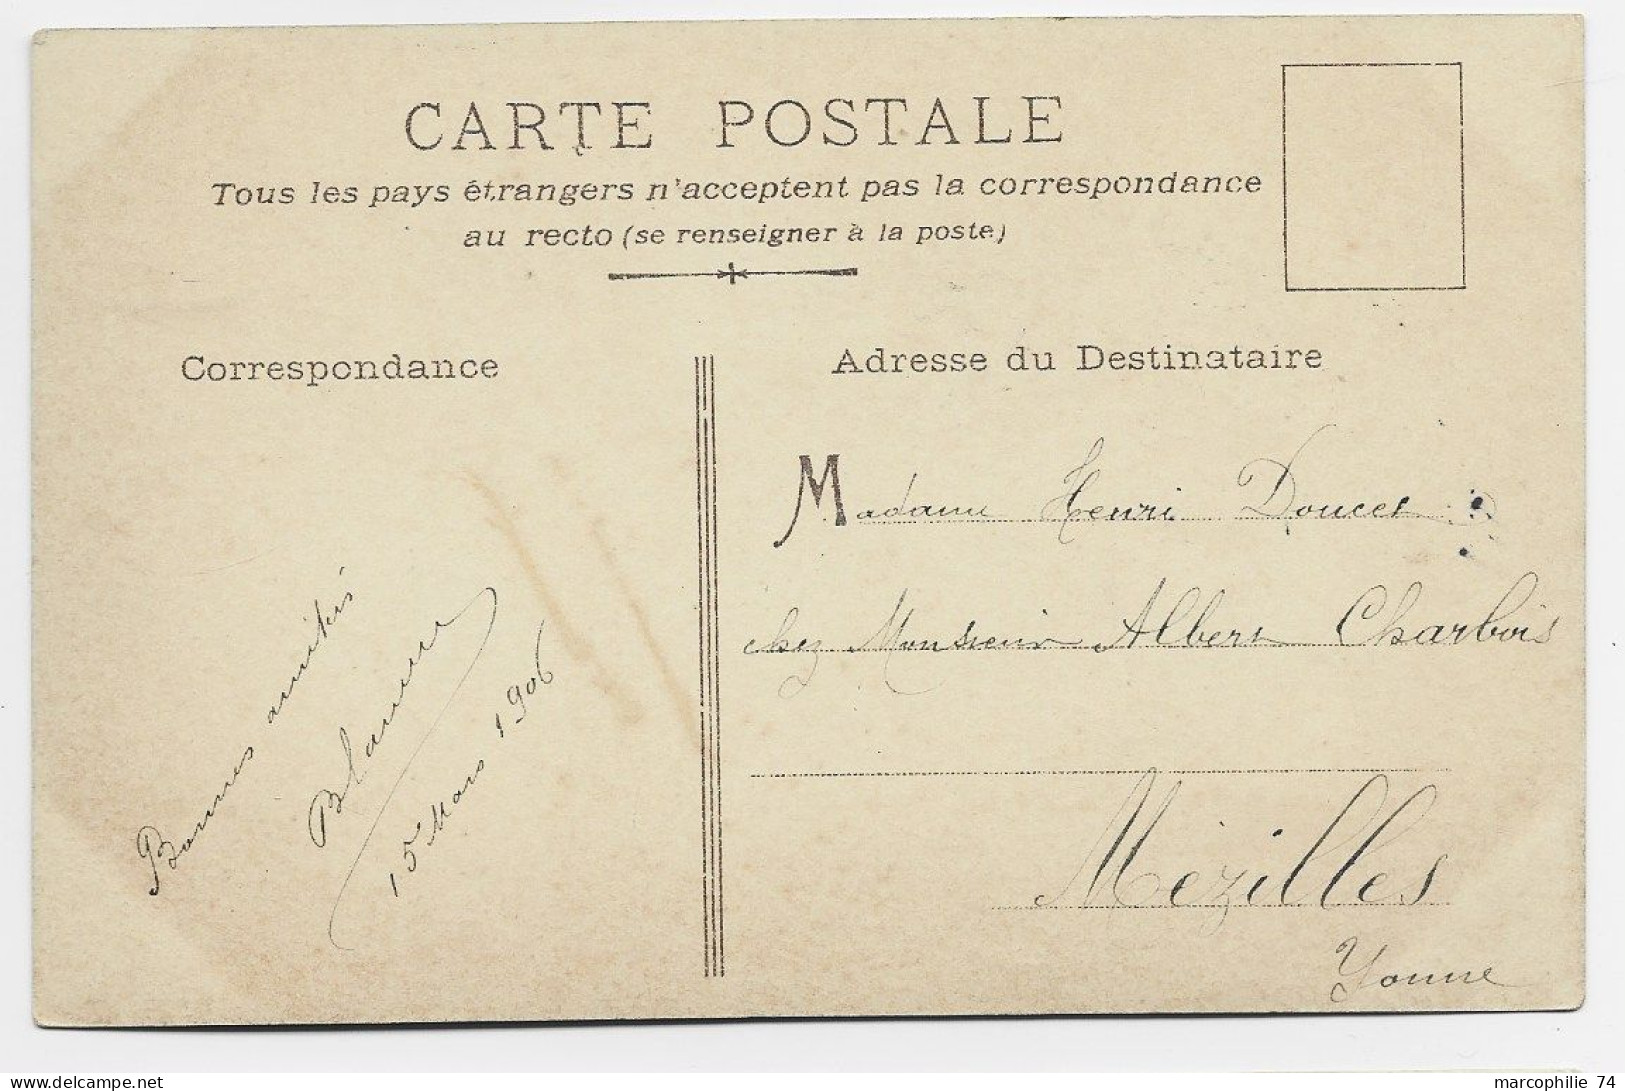 LUXEMBOURG CARTE LANGAGES DES TIMBRES POSTEE EN FRANCE ST BENOIT YONNE 1906 - 1906 Guillermo IV